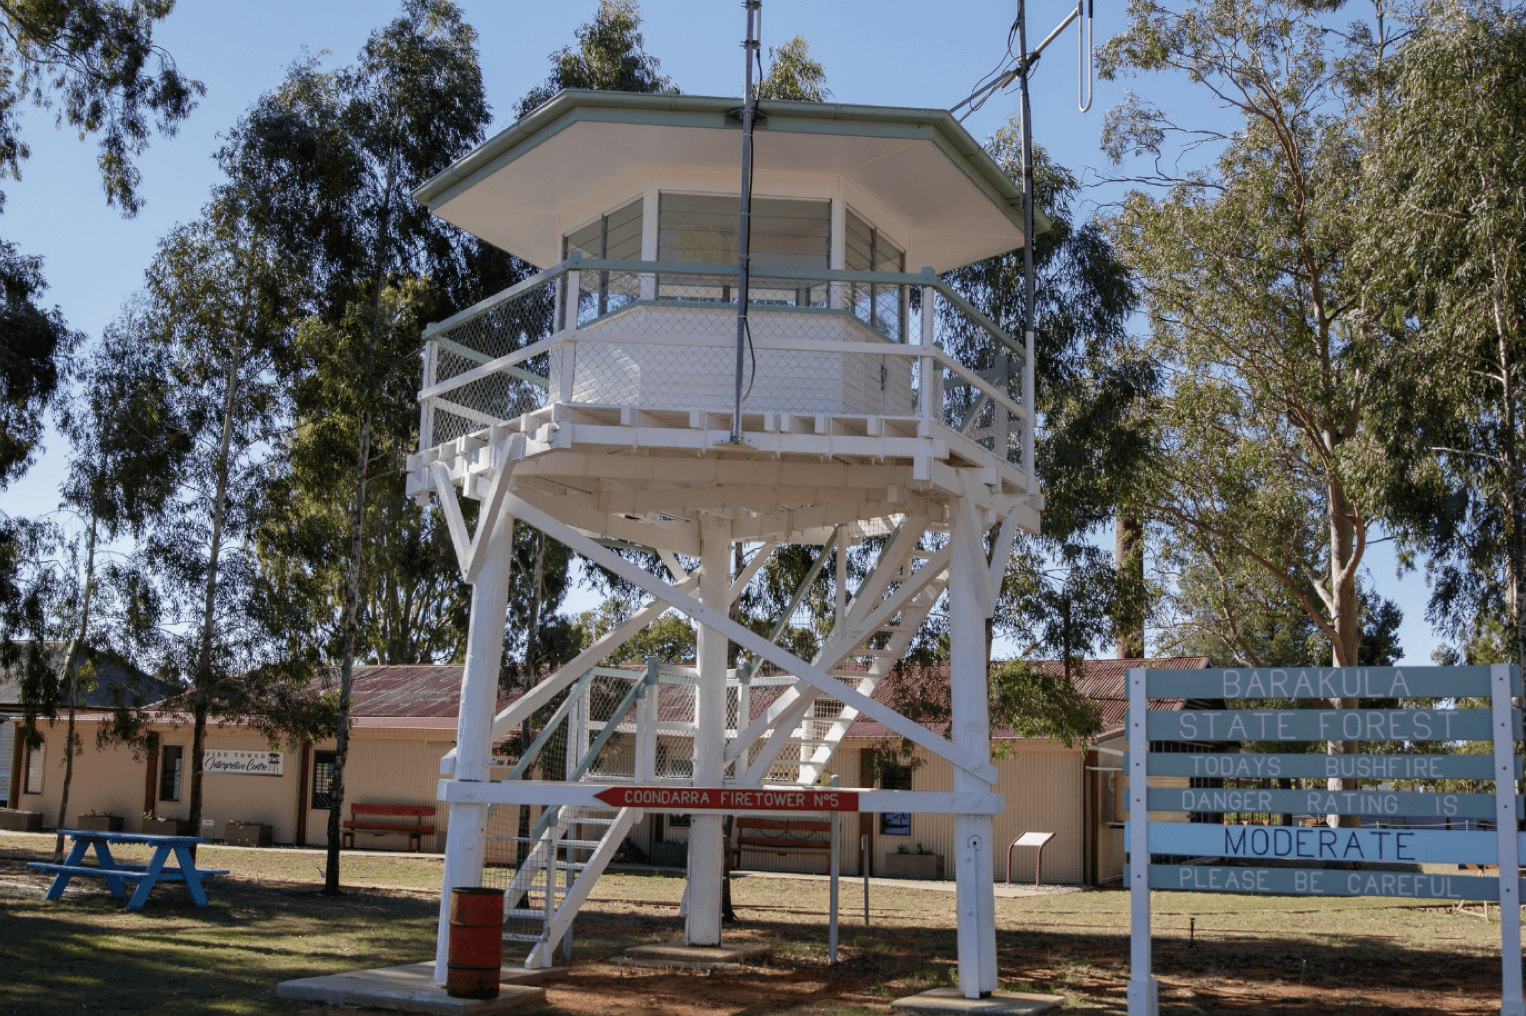 Fire Tower at Chinchilla Museum, Queensland